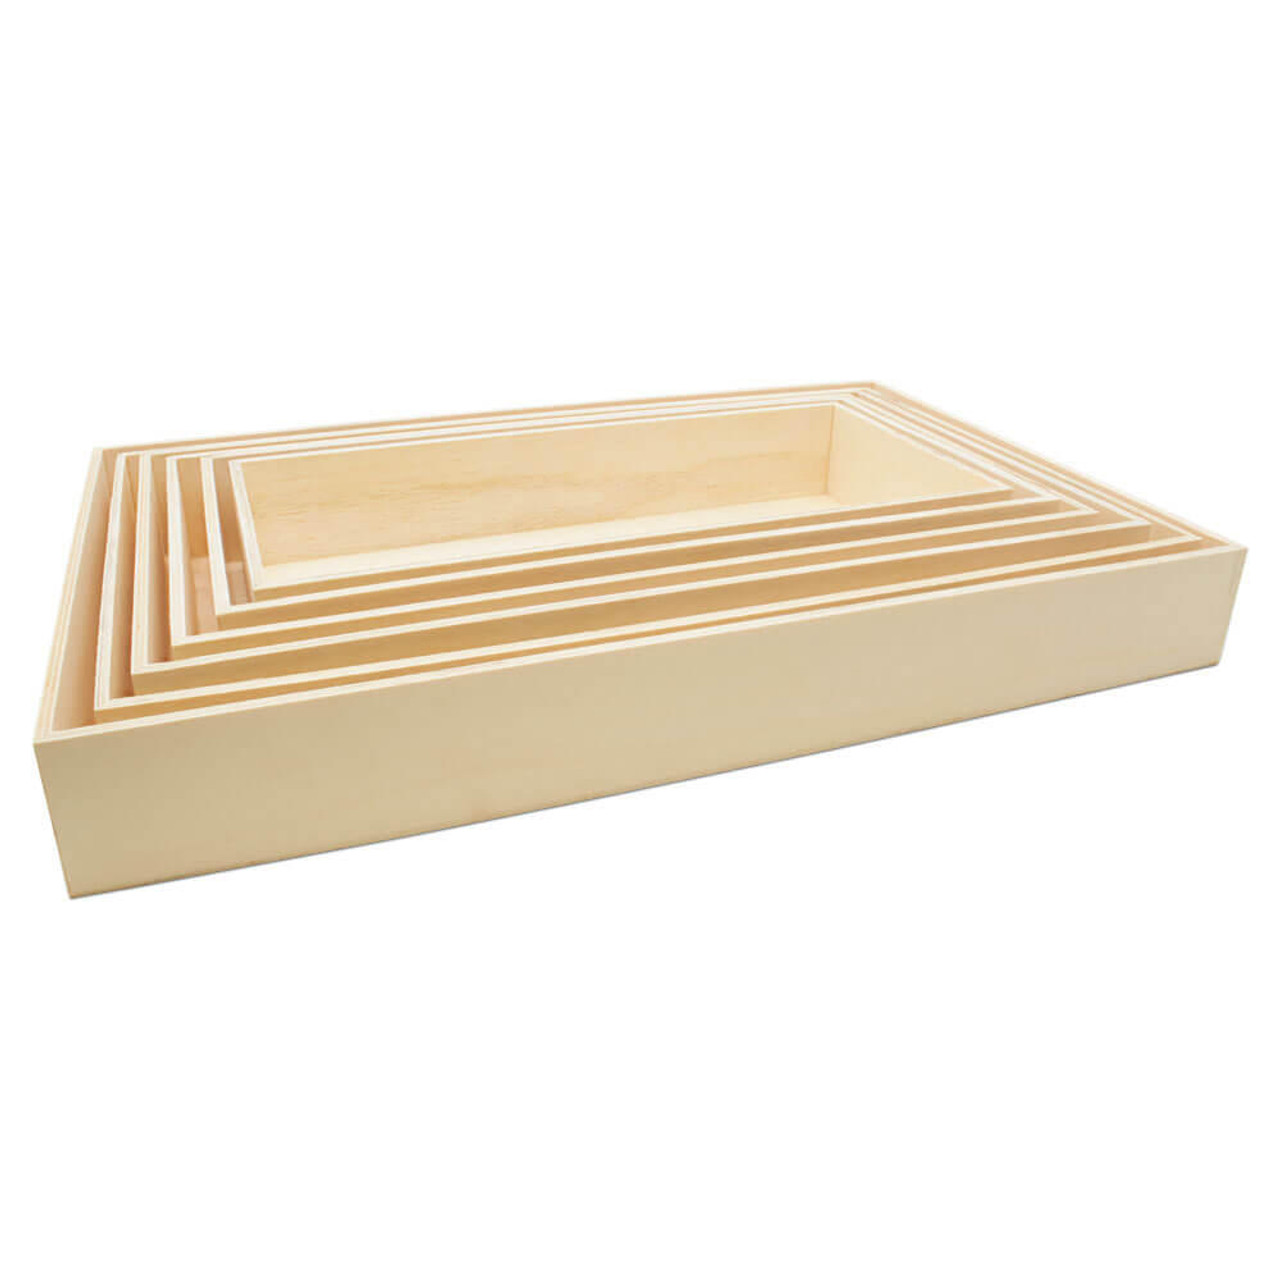 Montessori Wooden Serving Trays Rectangular Shape Wood Trays For